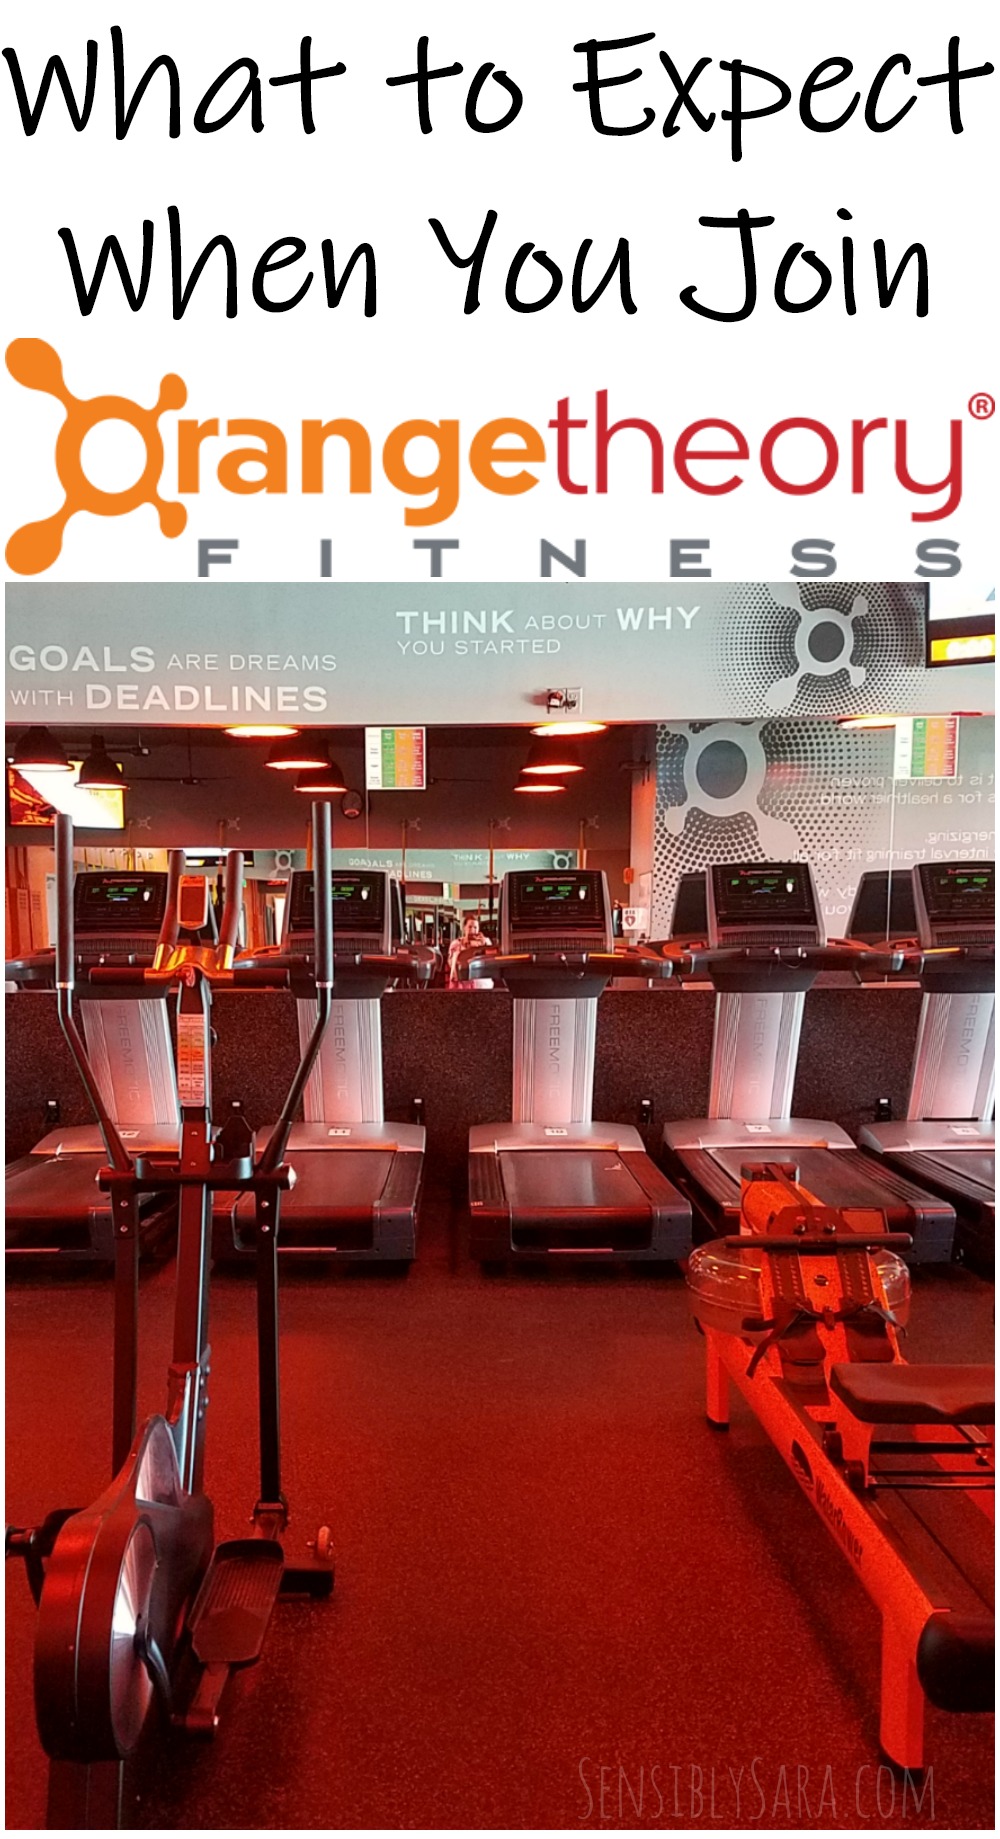 What to Expect When You Join OrangeTheory Fitness